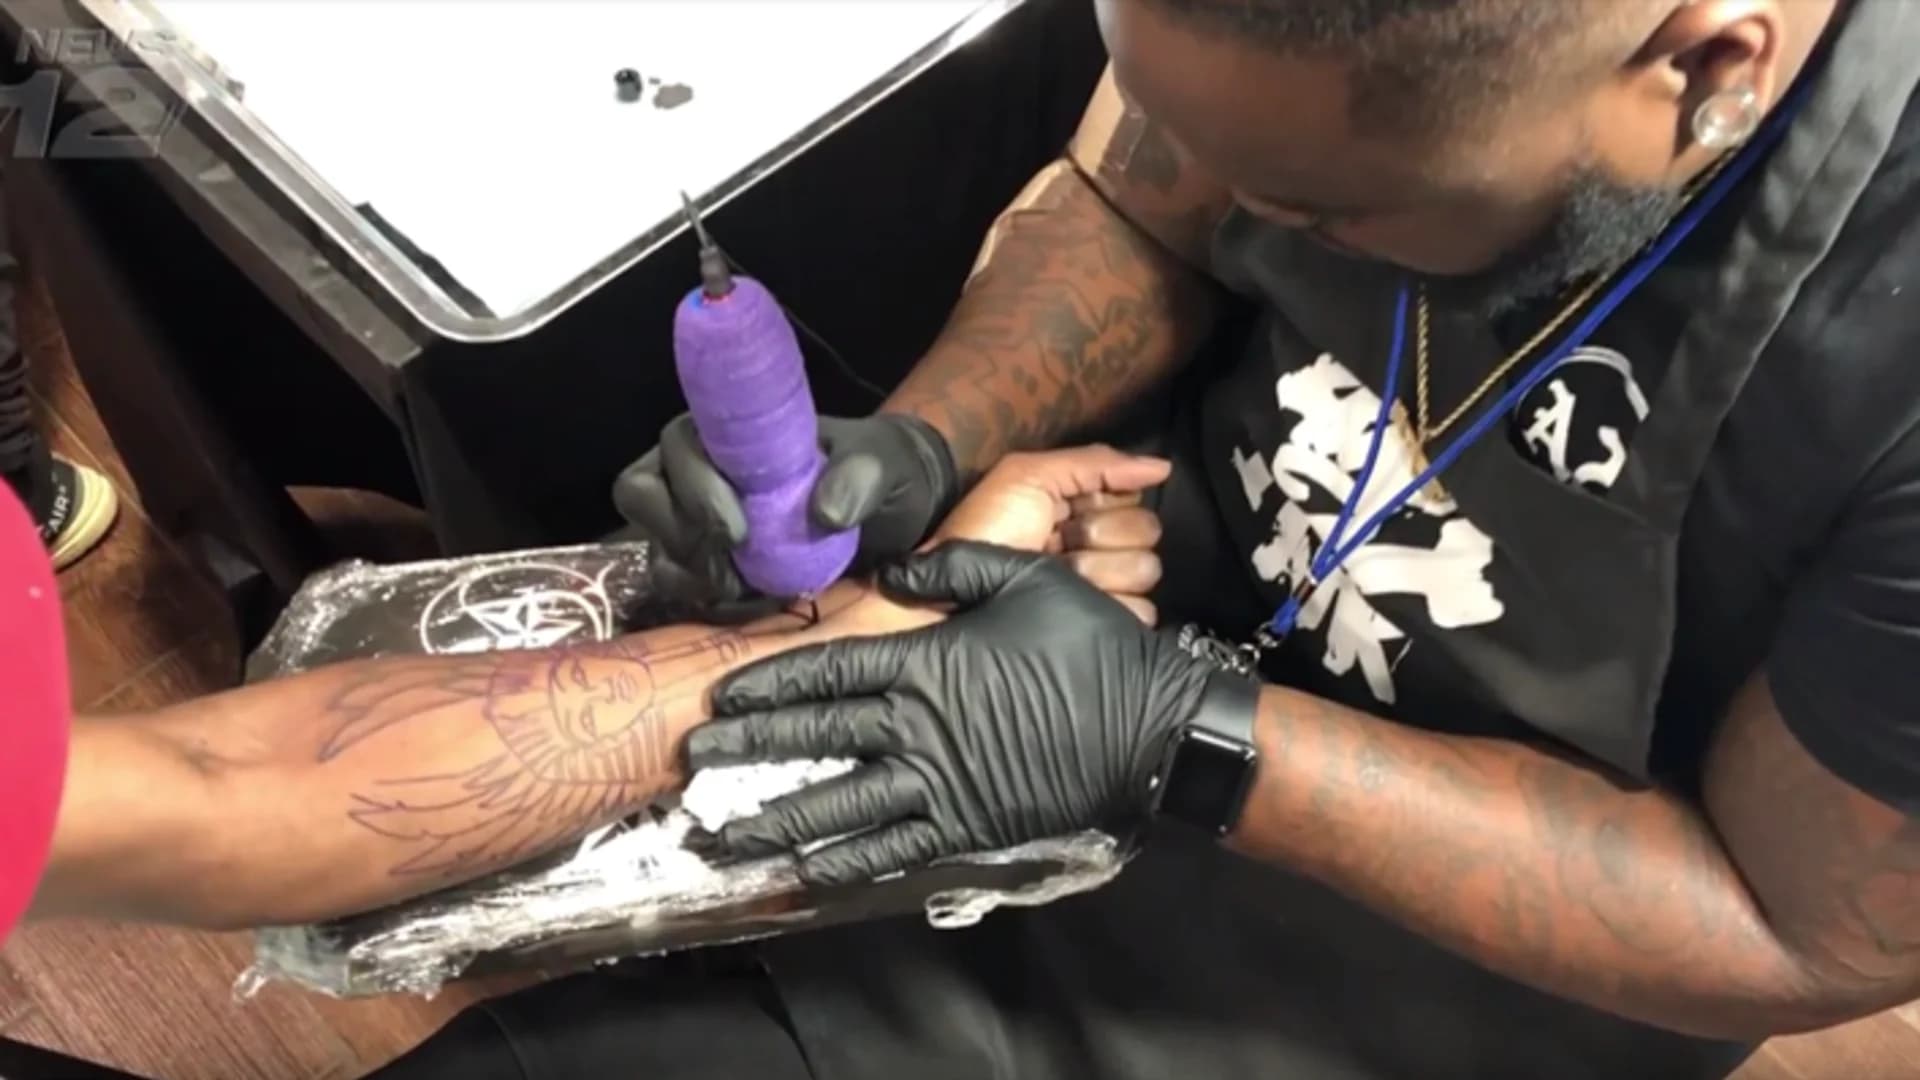 Tattoo artist shares tips on picking ink for different skin tones